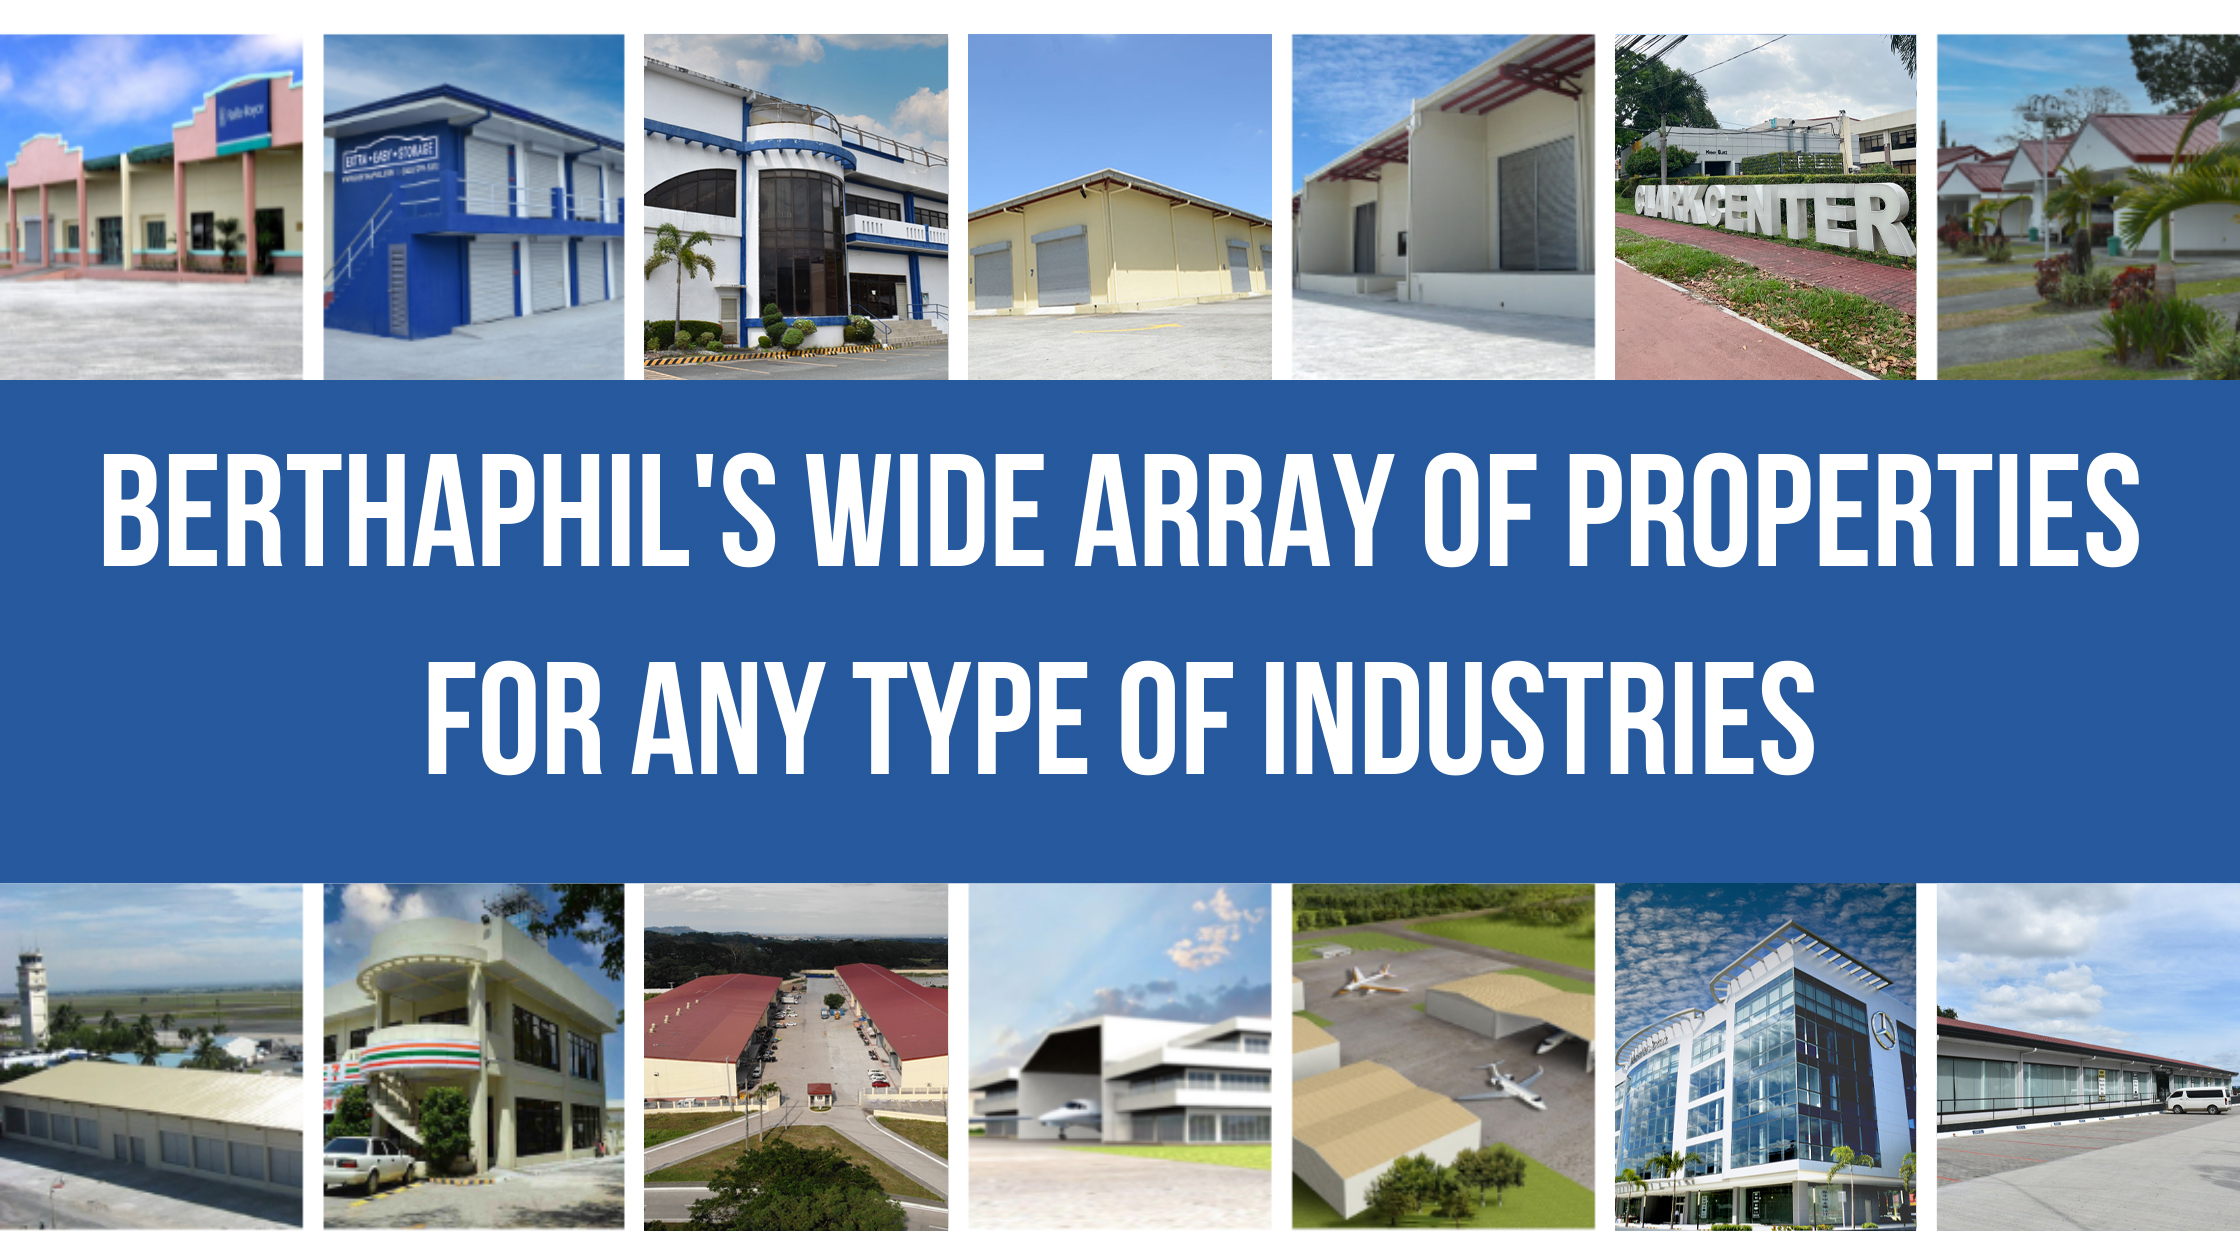 Berthaphil's Wide Array of Properties for Any Type of Industries